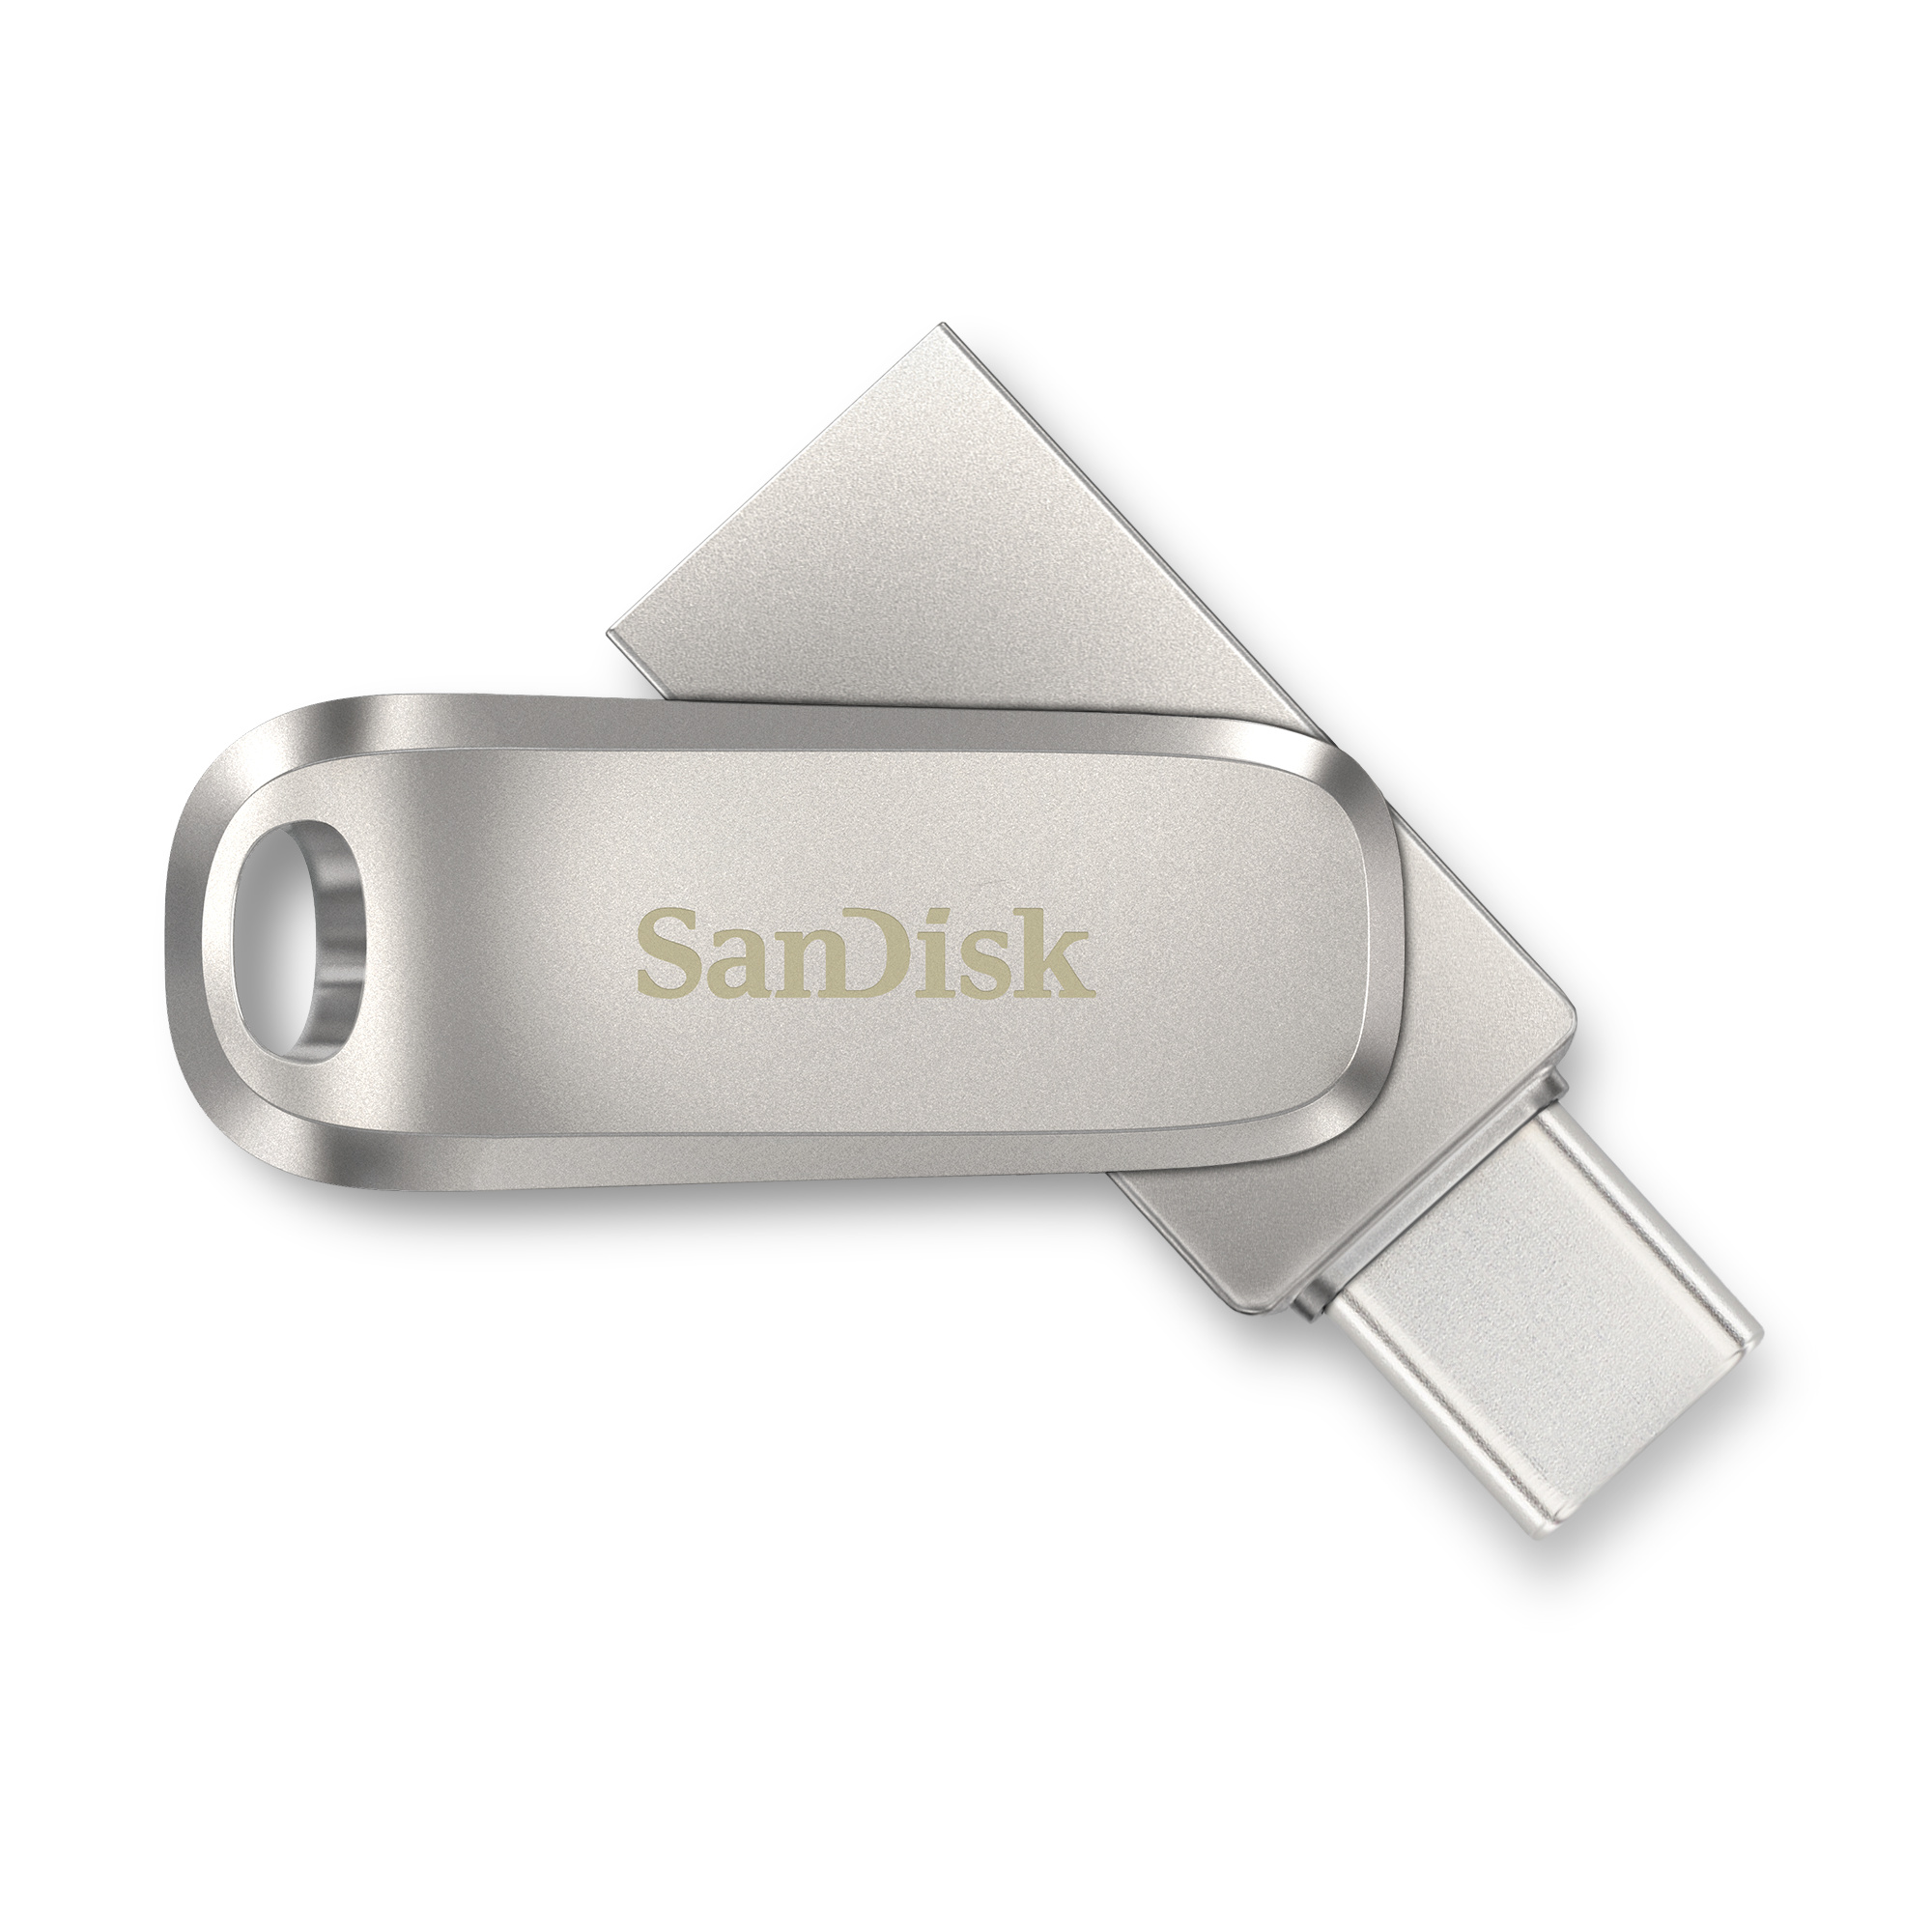 SanDisk Ultra Dual Drive Luxe USB Type-C Drive in Lagos Nigeria